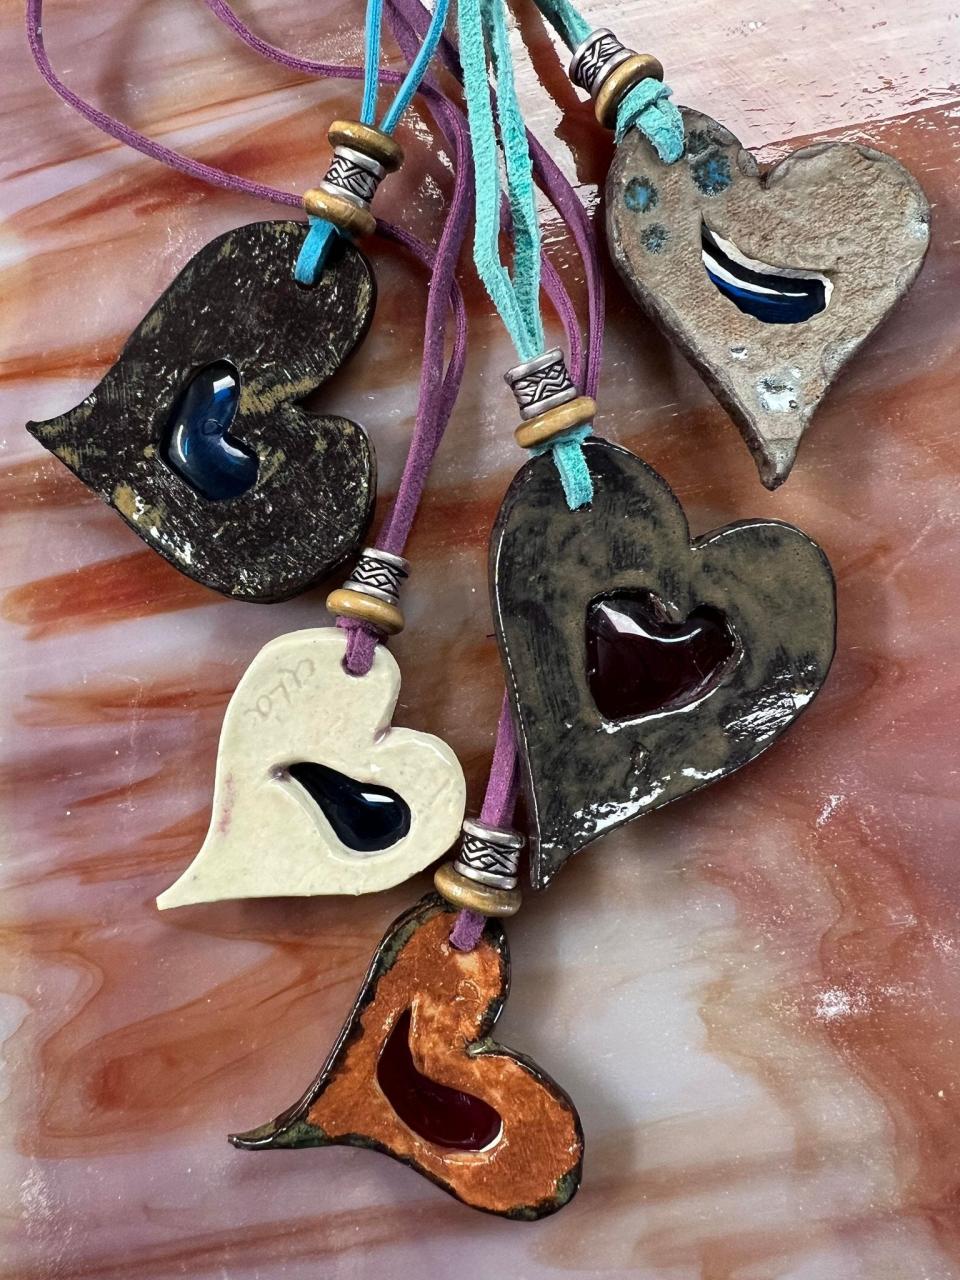 Just in time for Valentine's Day, El Paso artist Ana Luisa Arias has been creating ceramic hearts with blown glass inside for the perfect gesture of love. These ceramic and glass pendants are $18 each. Find her on her Facebook page, Stained Glass El Paso.